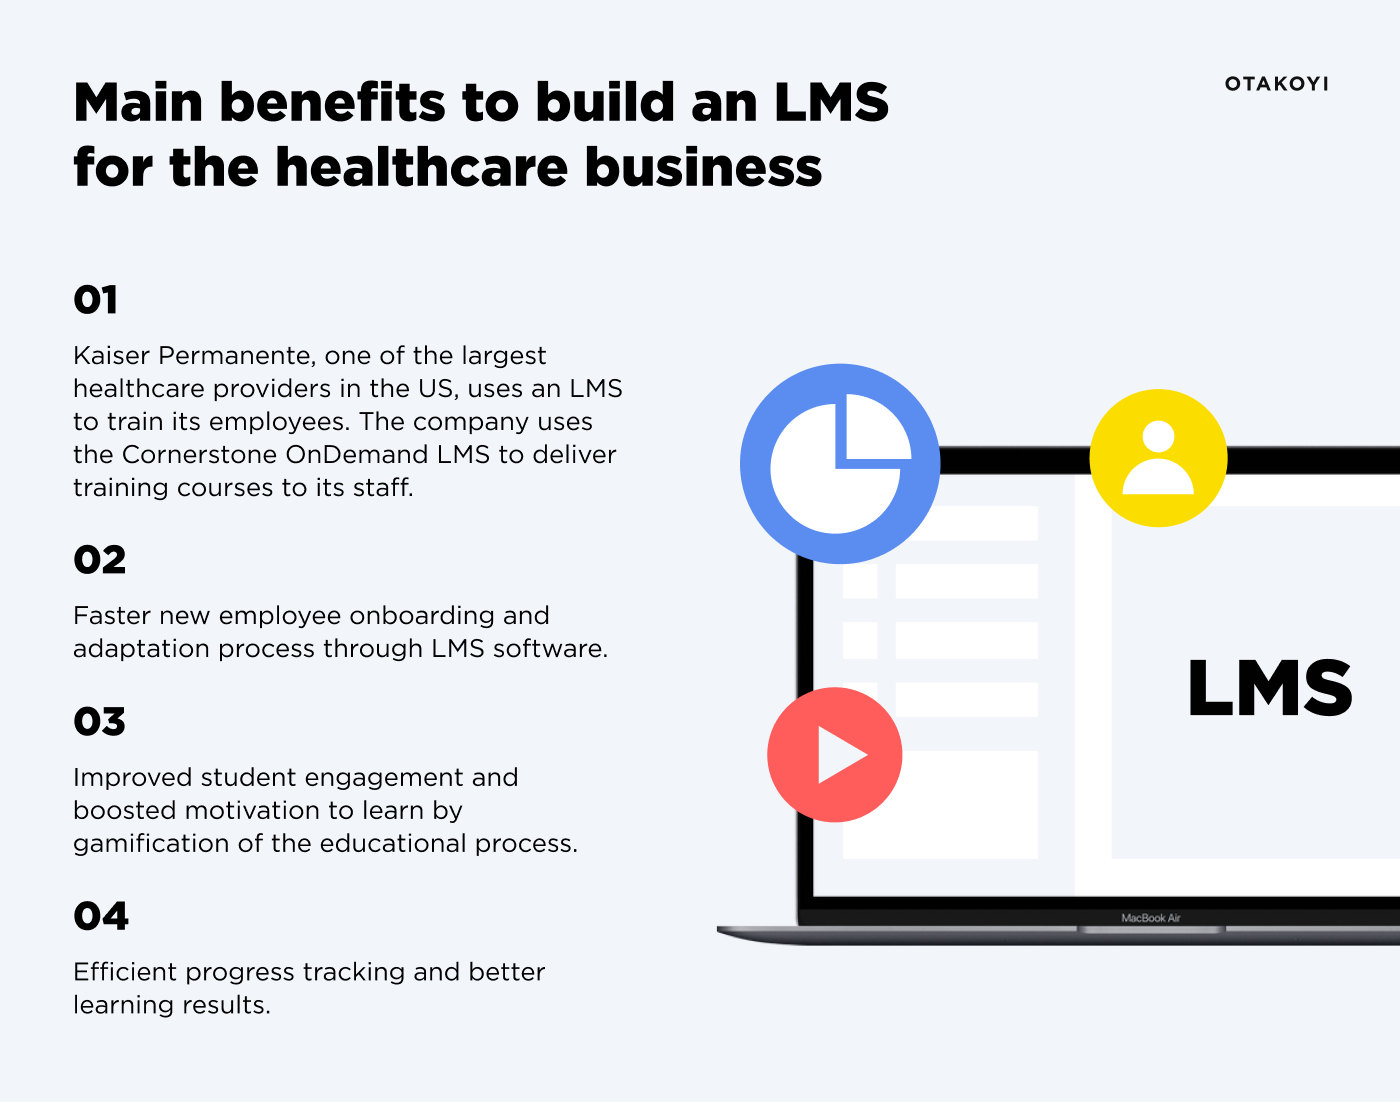 LMS benefits for a healthcare business